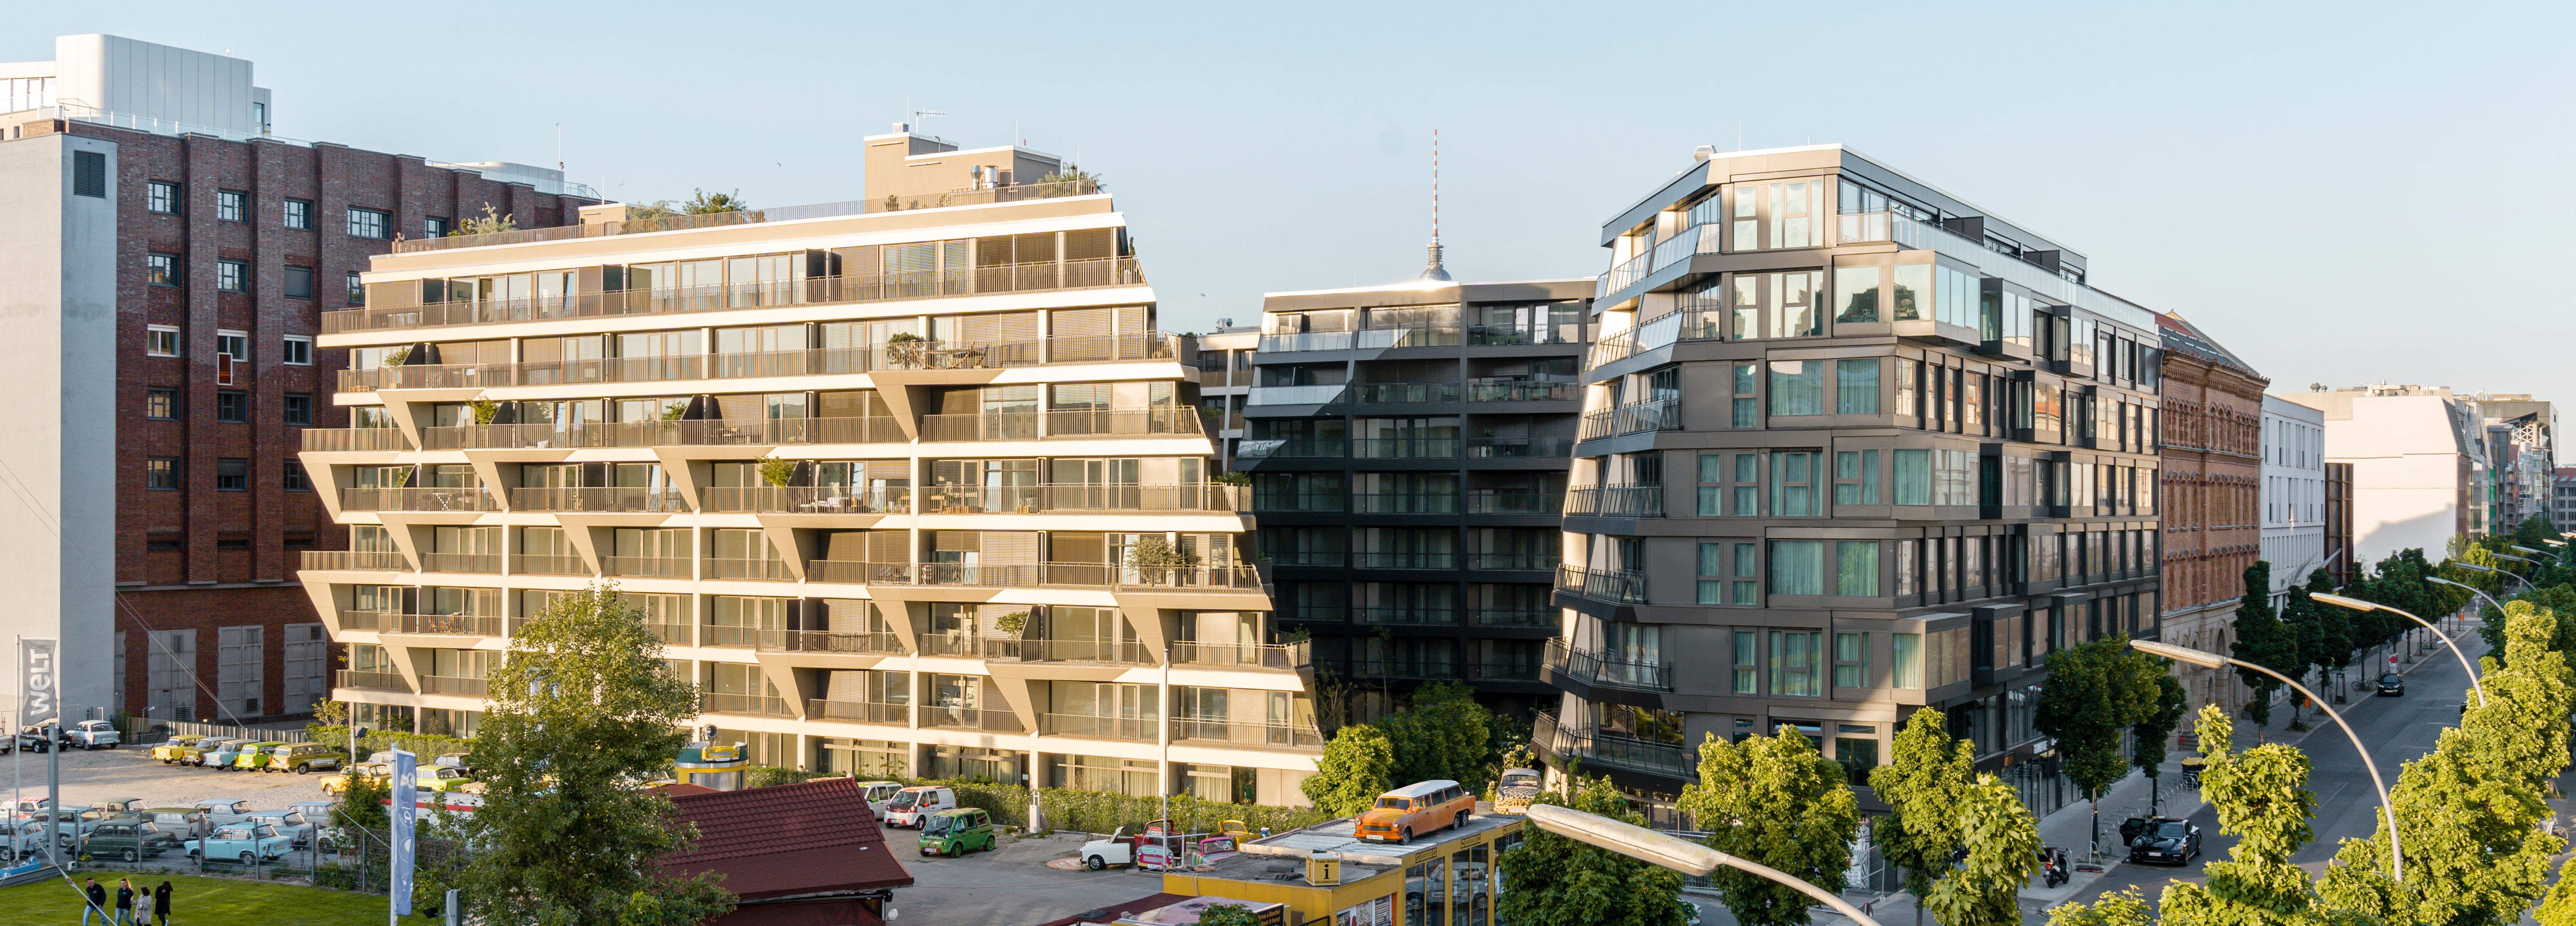 View of the building complex (c) BTTR GmbH